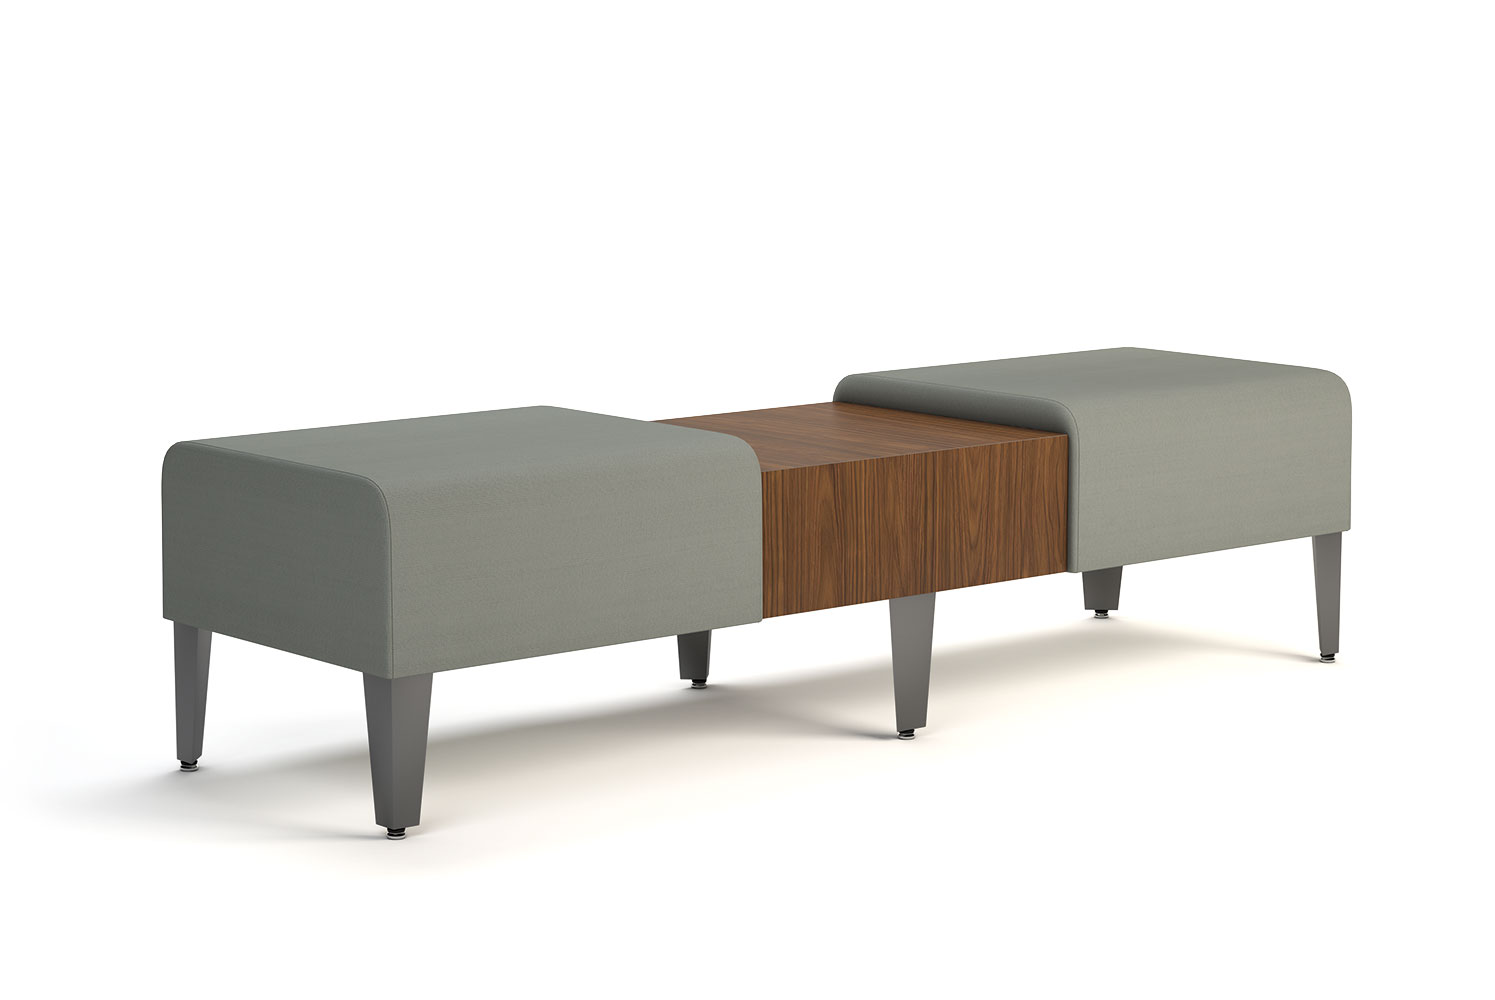 Malibu 3 Unit Bench with Center Online Table